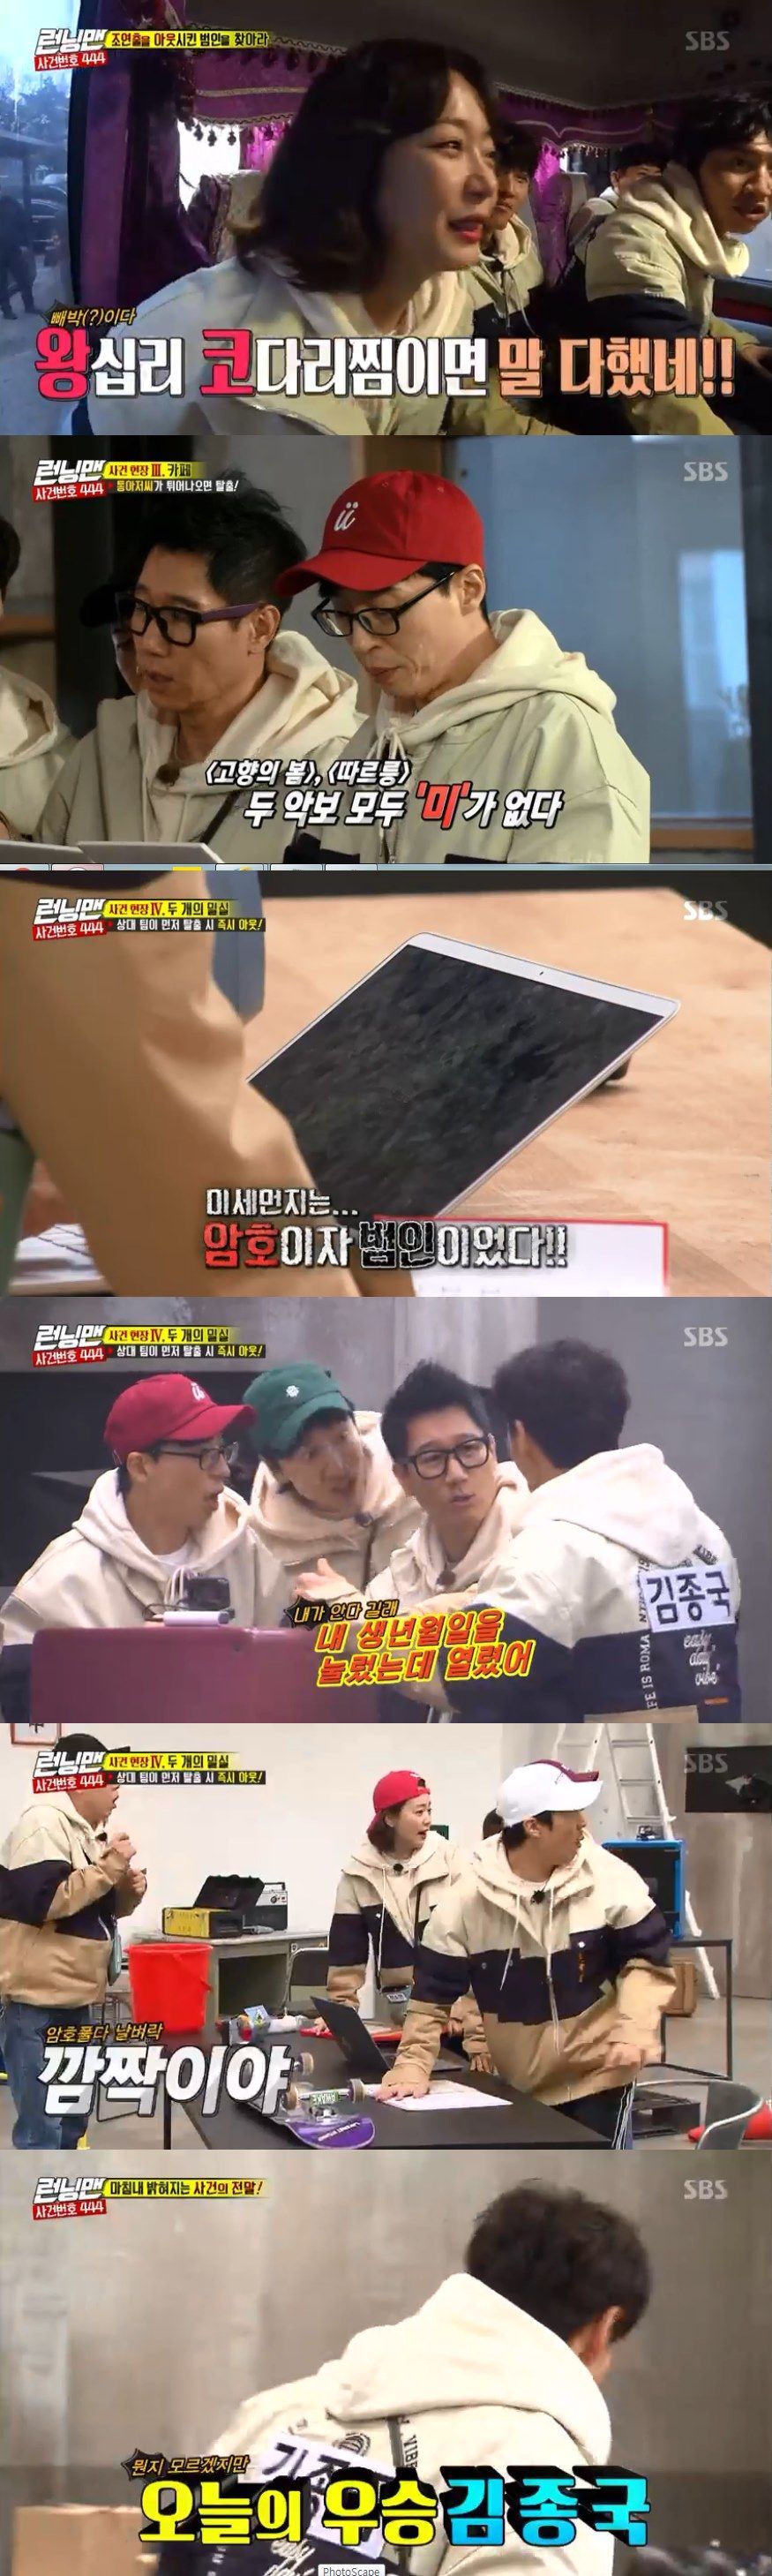 On SBS Running Man broadcasted on the 24th, it was featured in search of the criminal who left the supporting role.In the process of digging out who killed the supporting actor, he had to get a hint and dig out the mission to escape the room.Members who carried out the mission while moving the place found a calendar without Monday, a three-legged octopus without legs, and a score without mi.Haha and Song Ji-hyo said, There were no four Mondays, three octopus, and seven beauty.On the other hand, the Ji Suk-jin team approached with letters: Its not Monday, its MON, isnt it a distant reading?Kim Jong-kook found Mun and Ji as Murder, She Wrote, and Yoo Jae-Suk found the correct answer is fine dust.But the win at the final stage went to Kim Jong-kook.Lee Kwang-soo Ji Suk-jin Yoo Jae-Suk ran out of the mission card Only three people can escape from the room, but Kim Jong-kook was indoors.Kim Jong-kook, who avoided fine dust, became a fisherman winner.